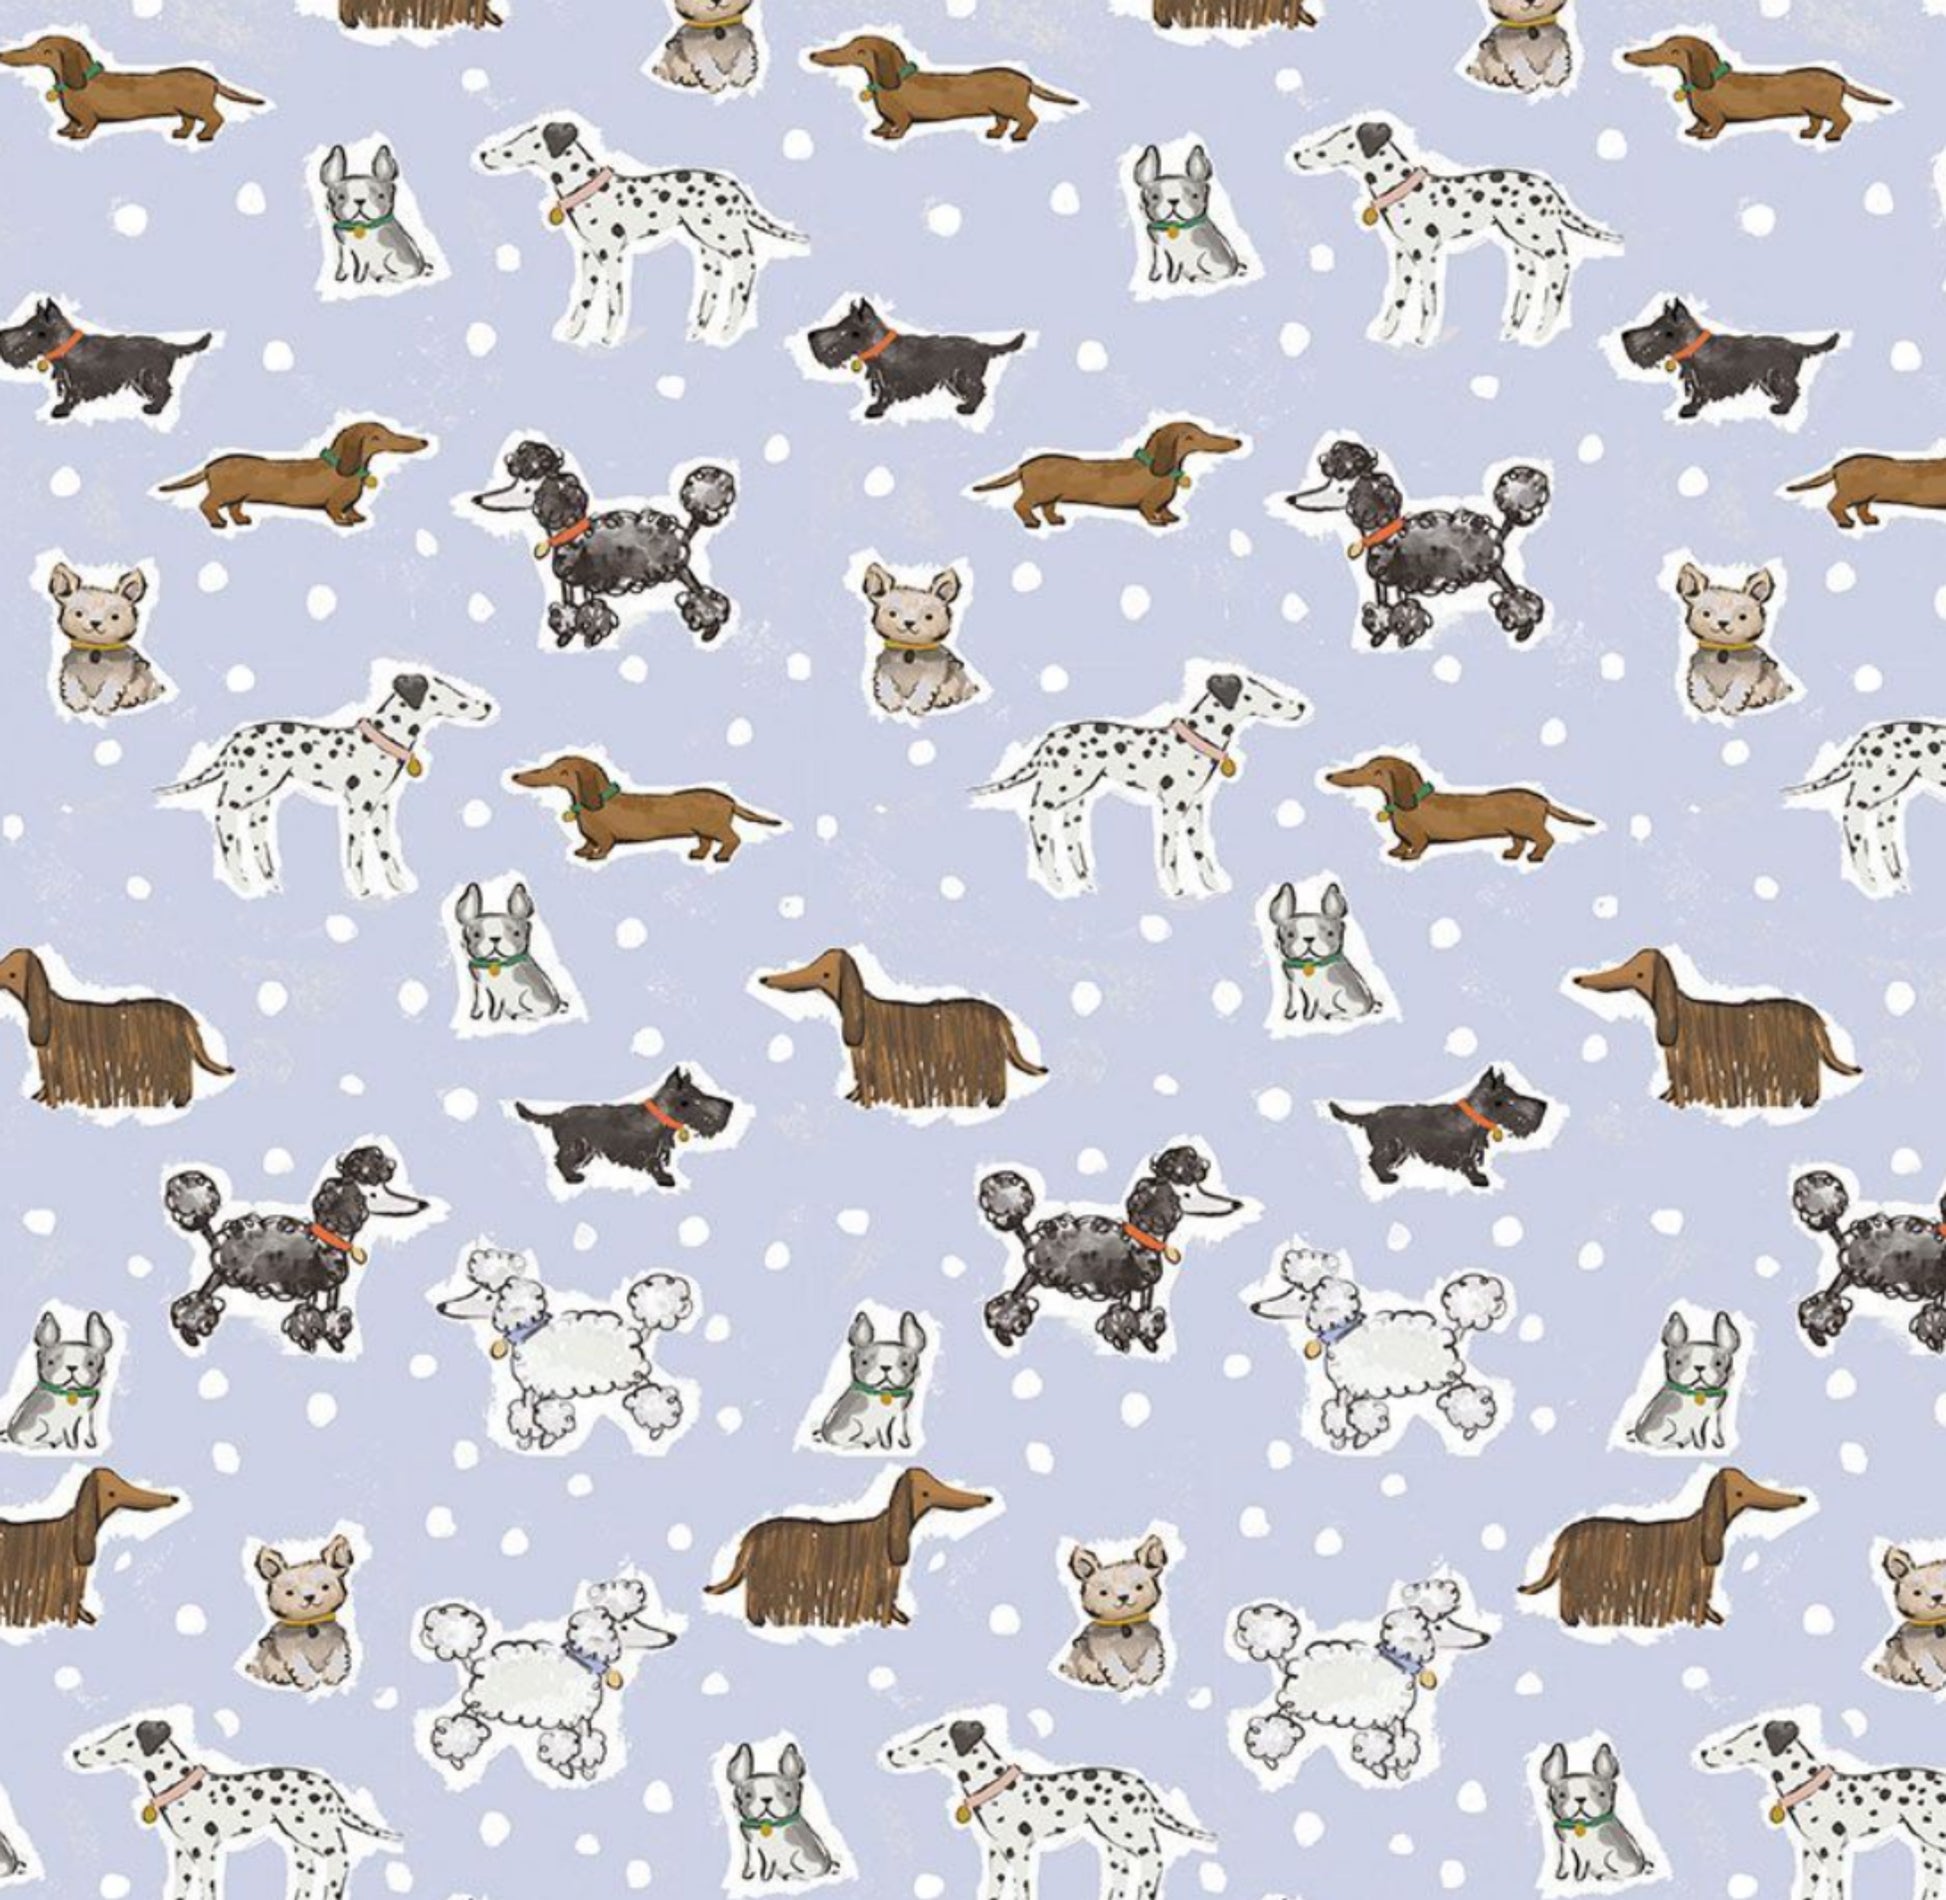 Stay Pawsitive - Dogs by Clara Jean for Dear Stella DJC2568 - Dogs on a Lavender Background